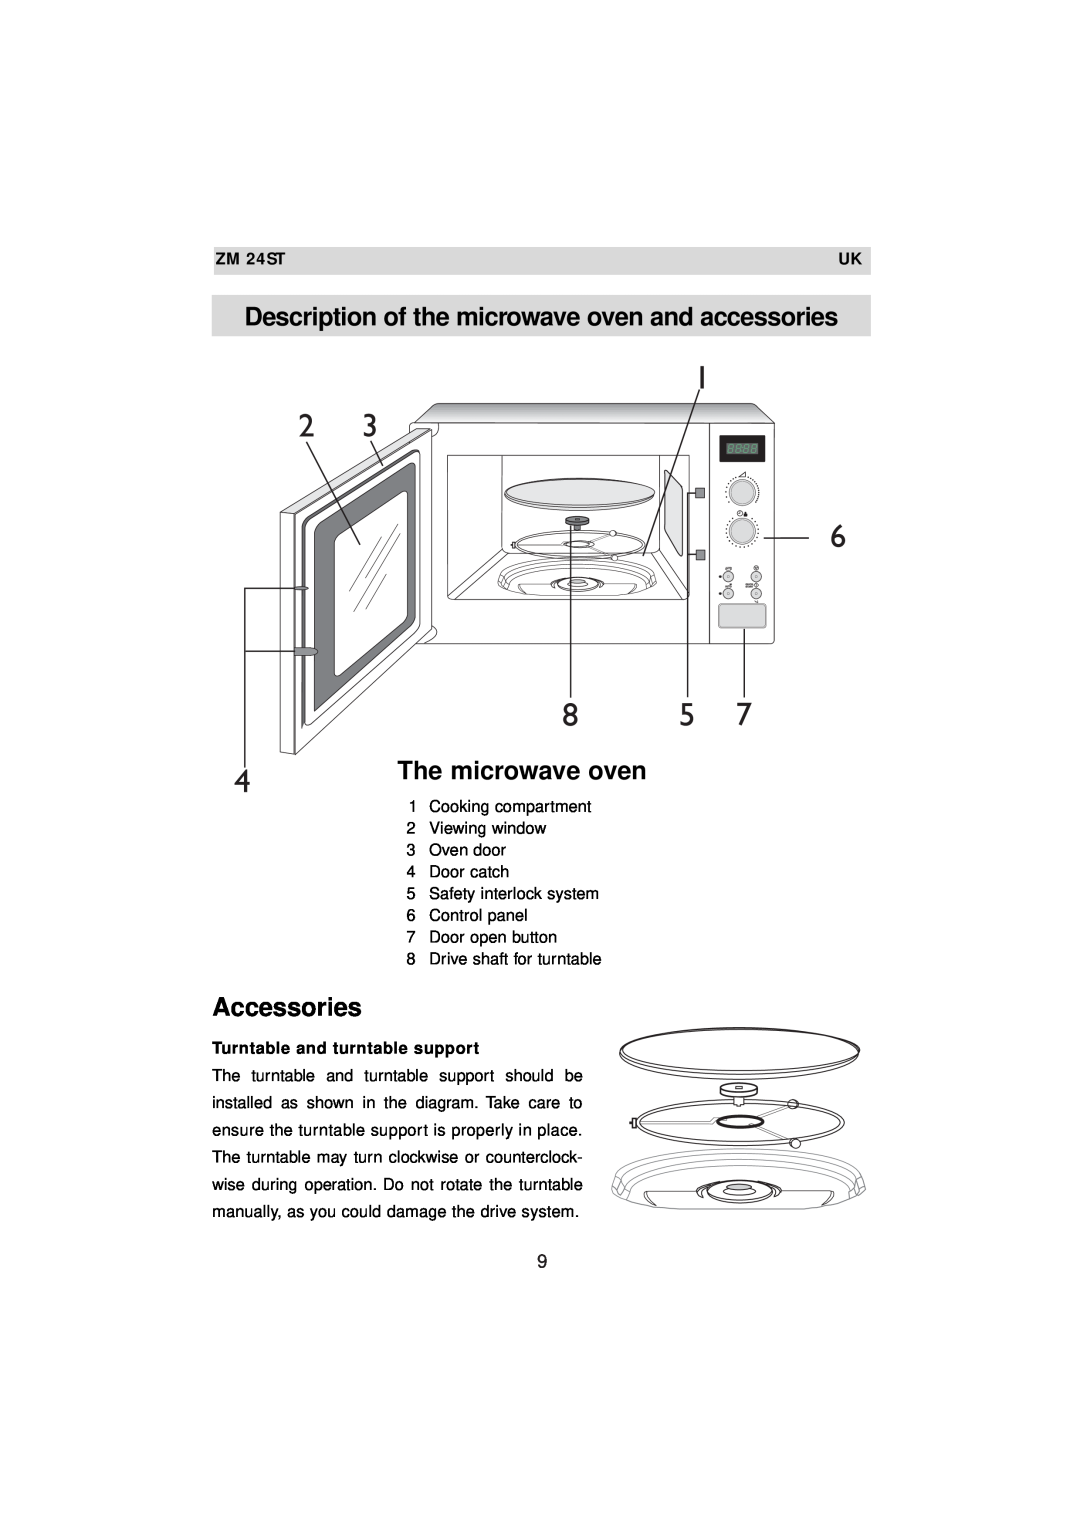 Zanussi ZM 24ST instruction manual Description of the microwave oven and accessories, The microwave oven, Accessories 